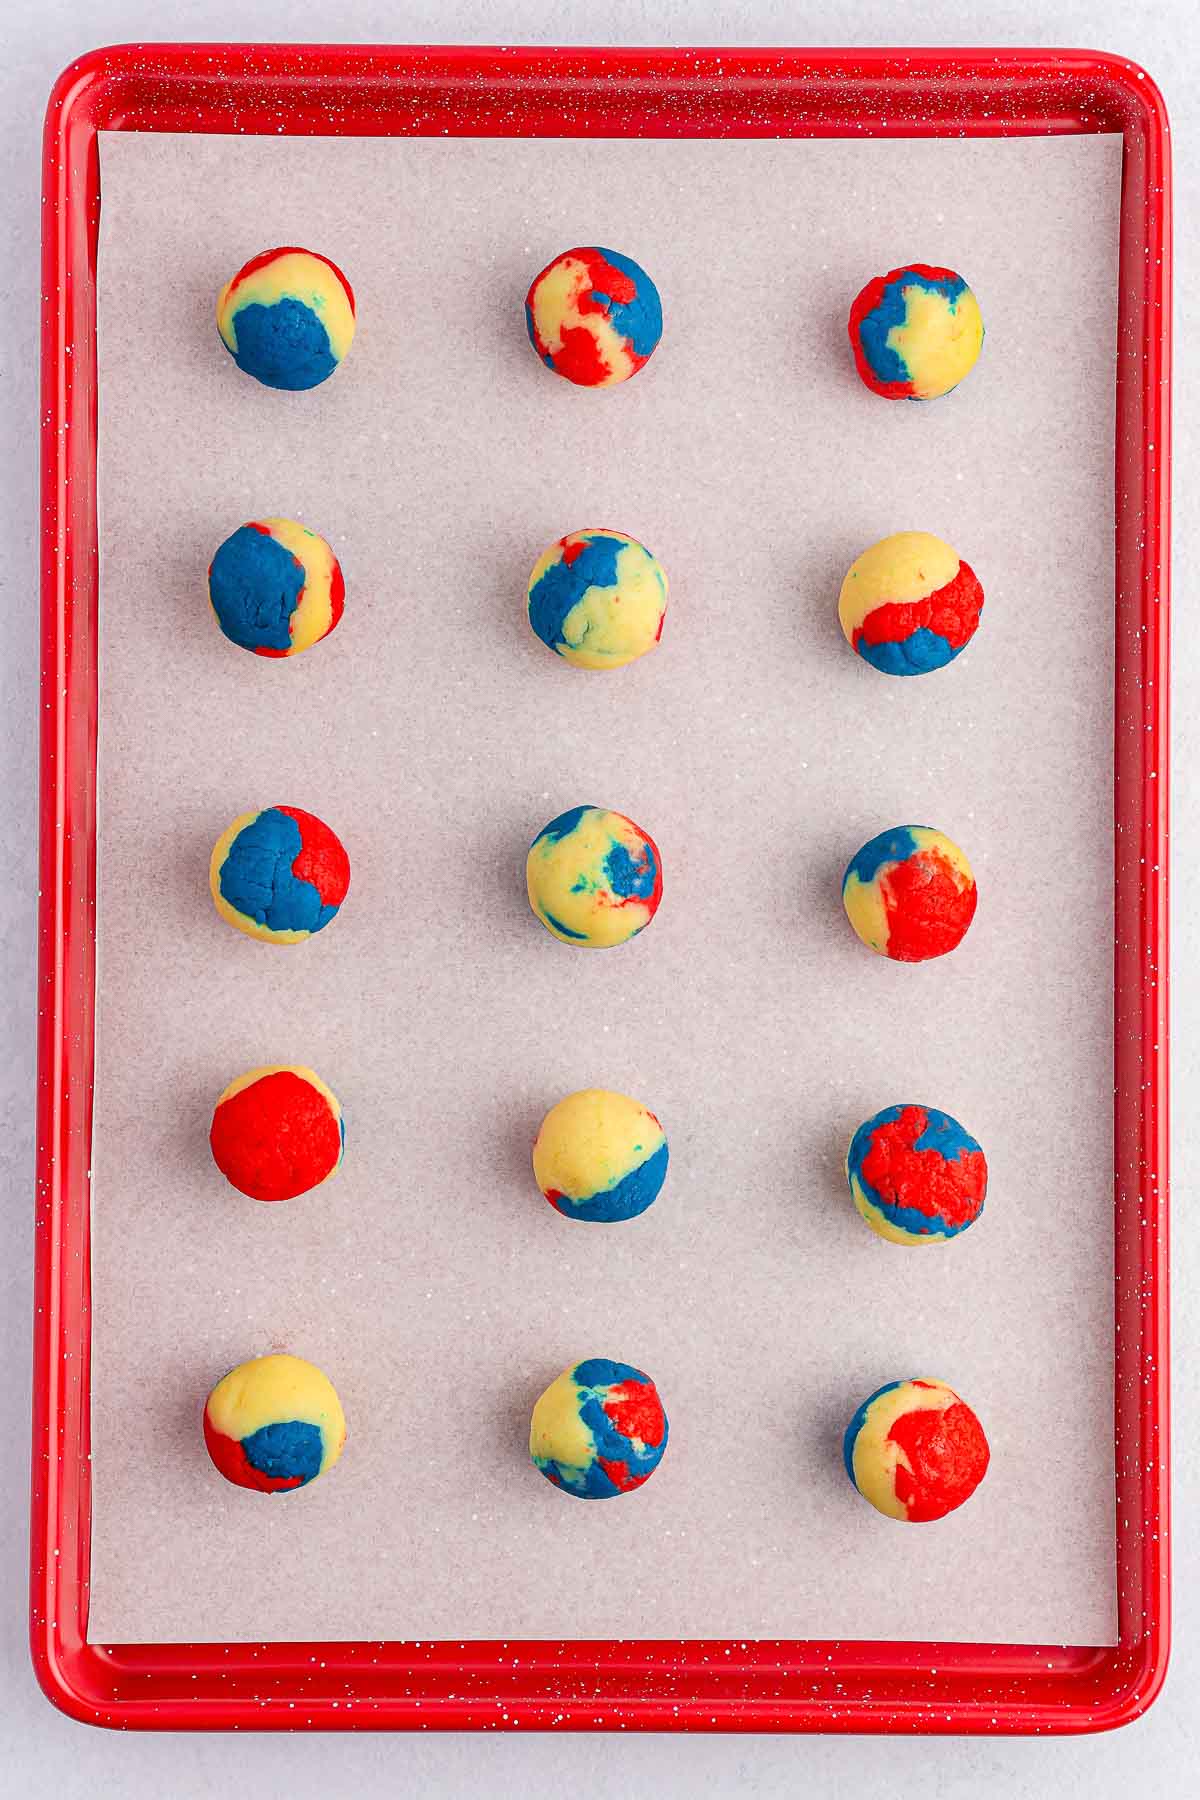 baking sheet with rolled red white and blue cake balls.